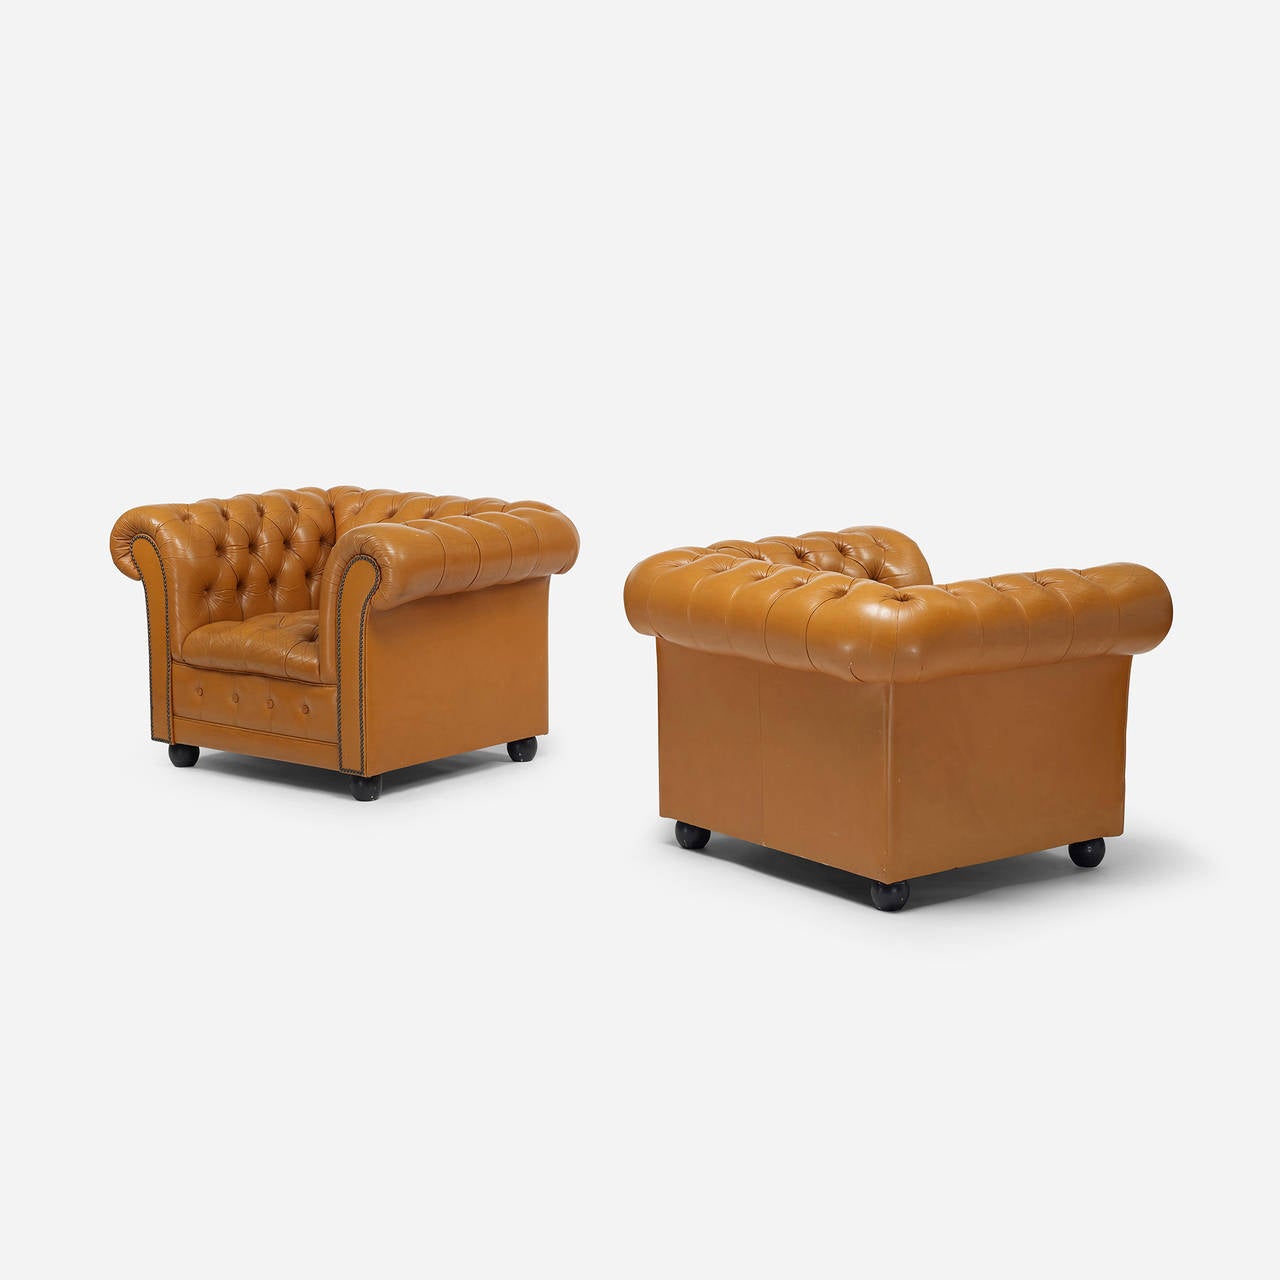 Pair of Chesterfield lounge chairs.